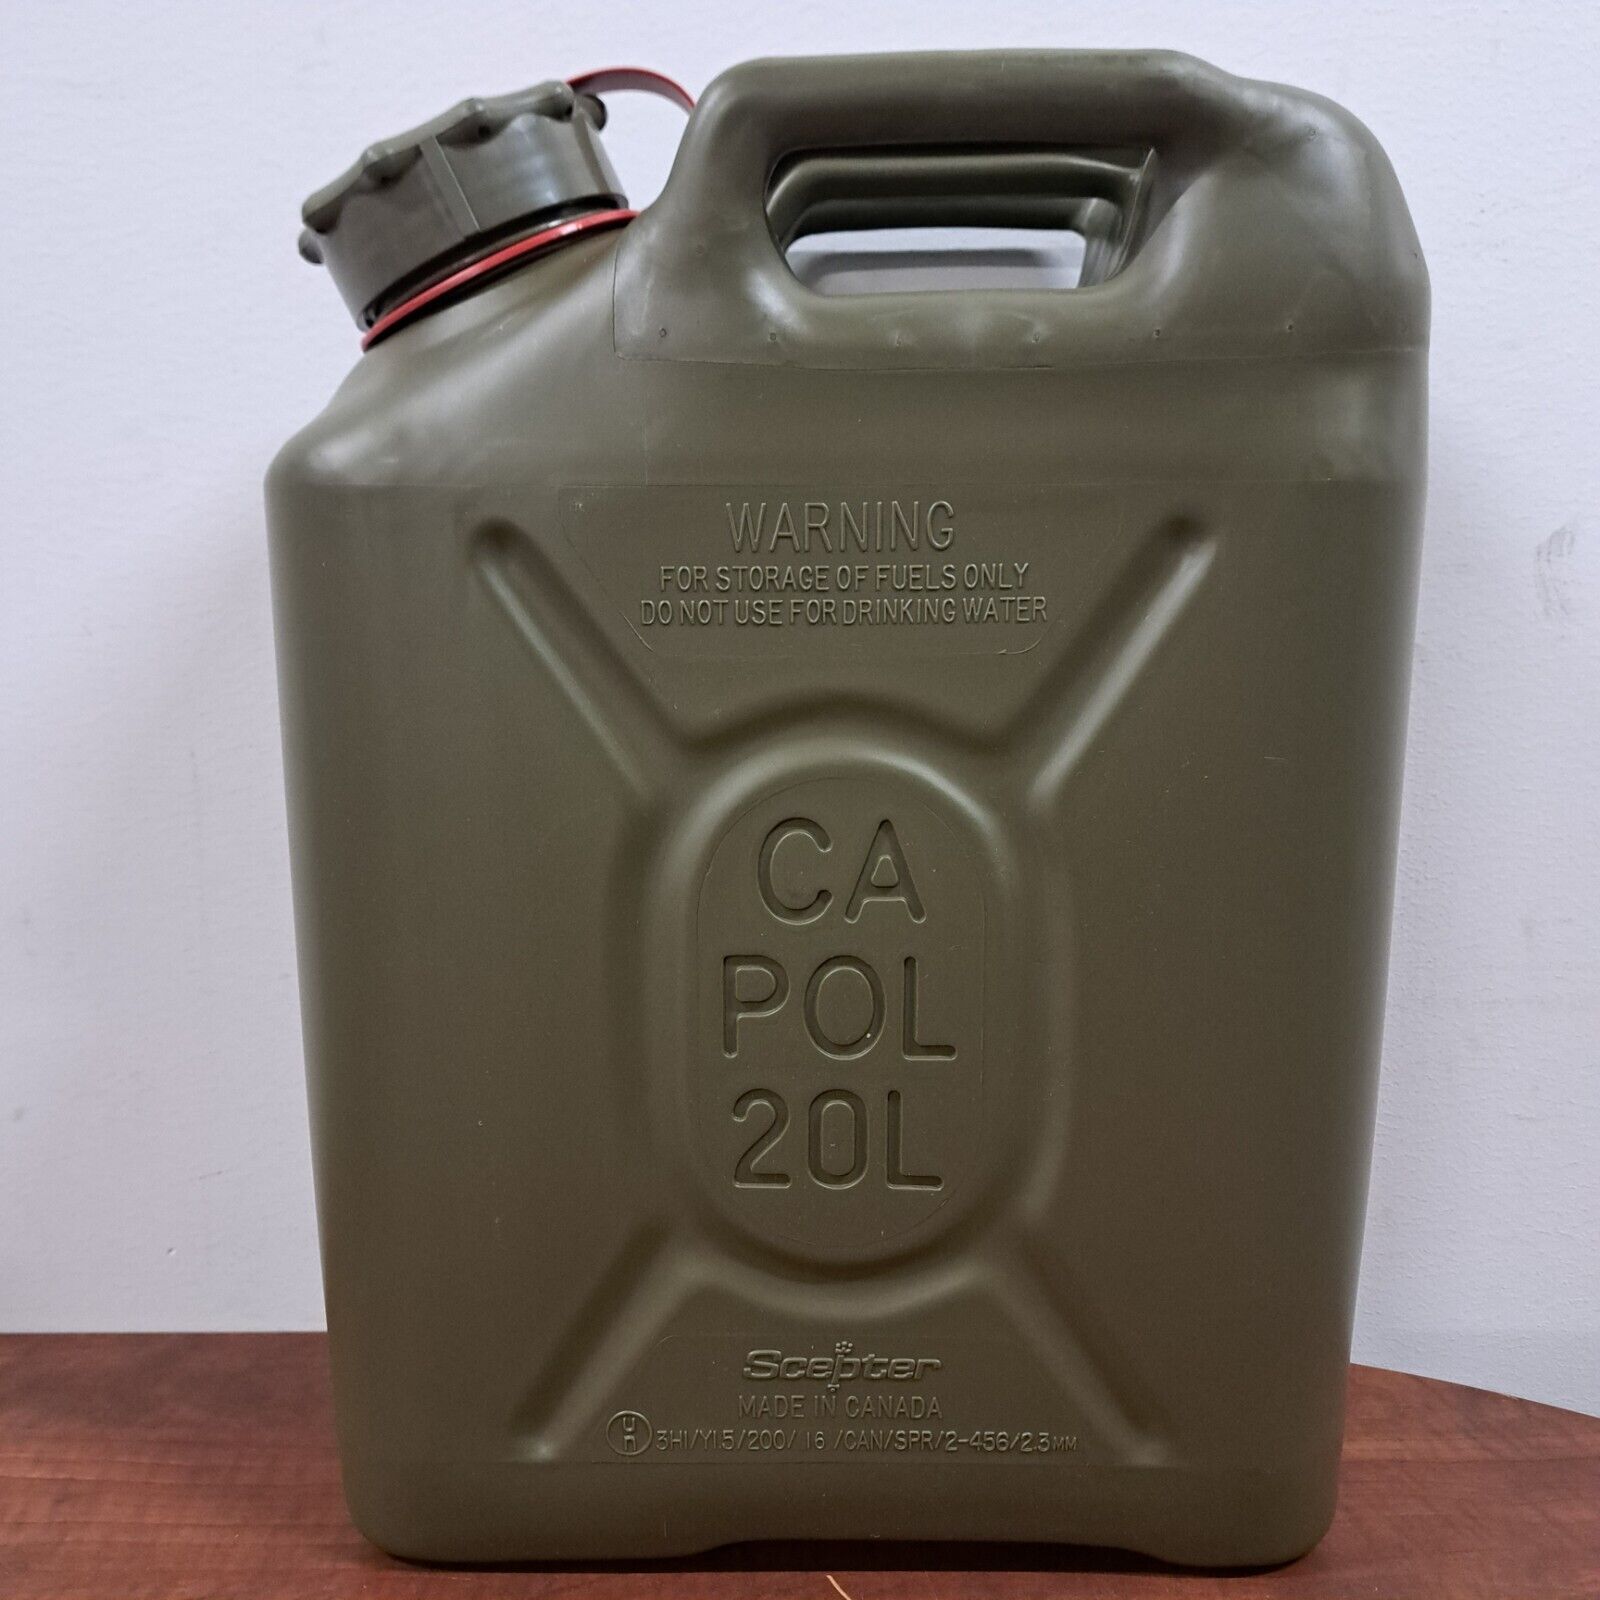 Brand New Scepter Genuine 5 Gallon / 20 L Olive Drab Military Fuel Can (MFC).